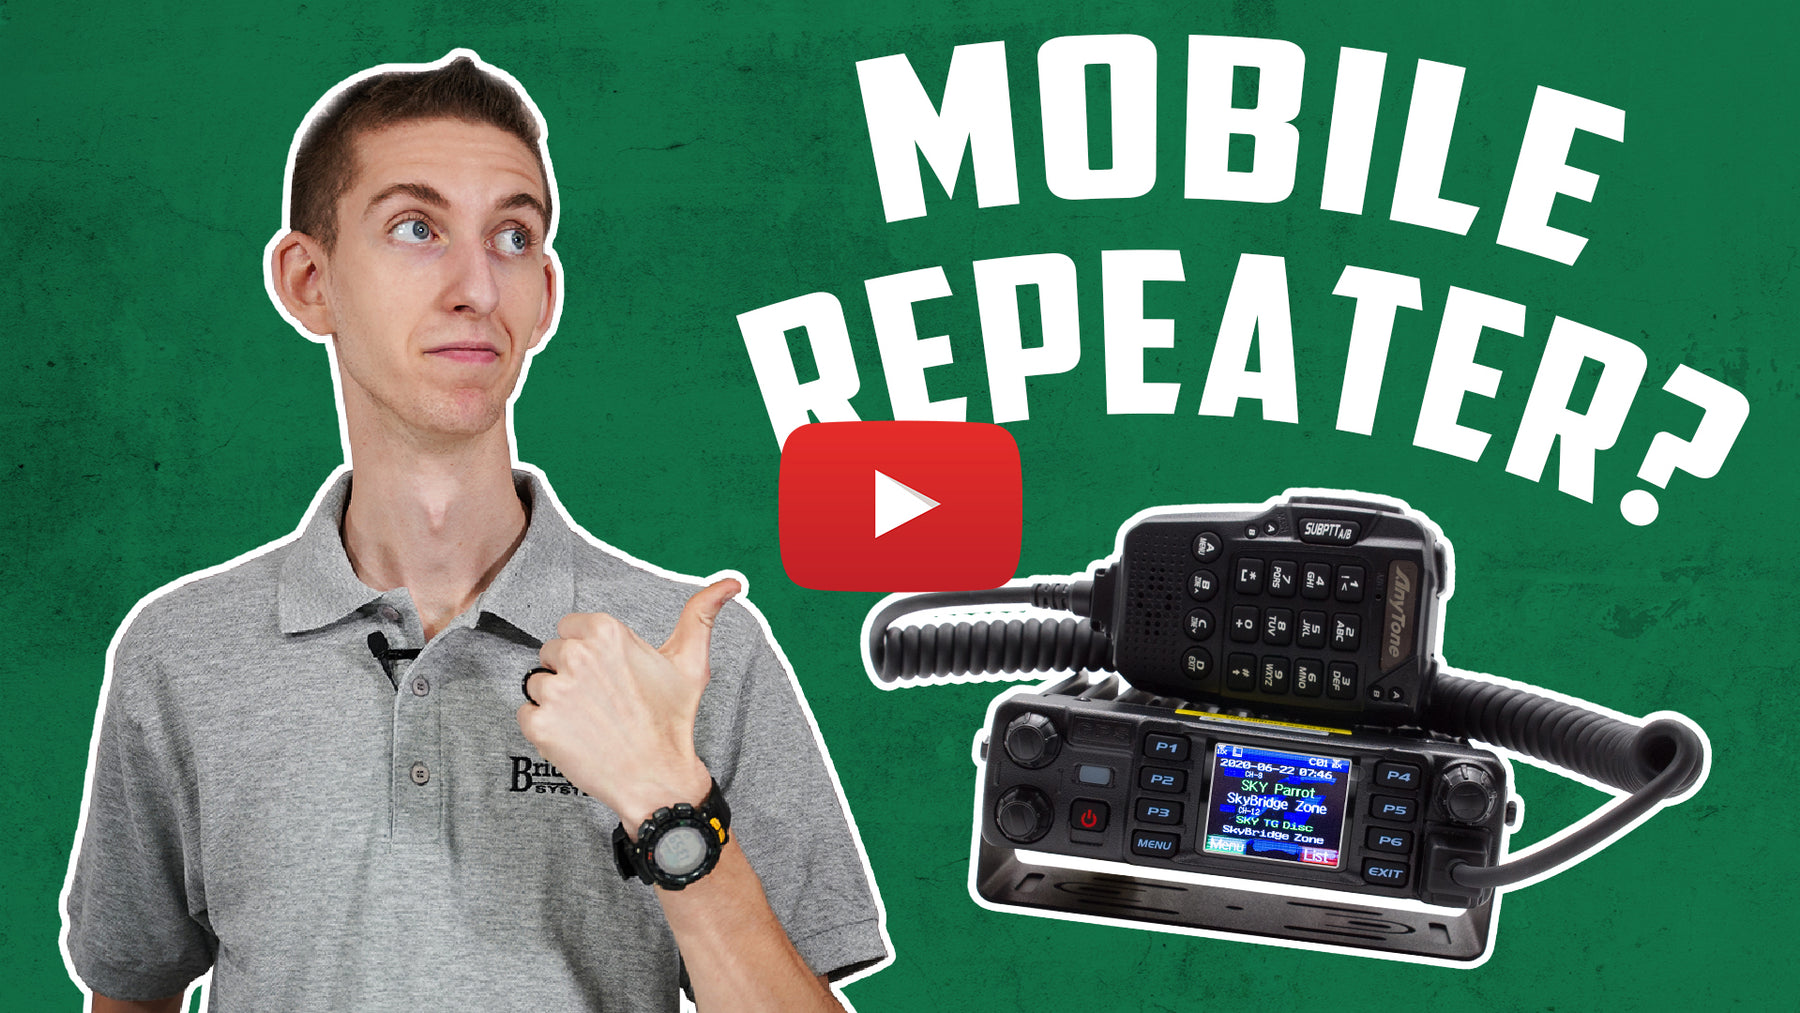 Turn Your Mobile Radio Into a Repeater with this Quick Tutorial!